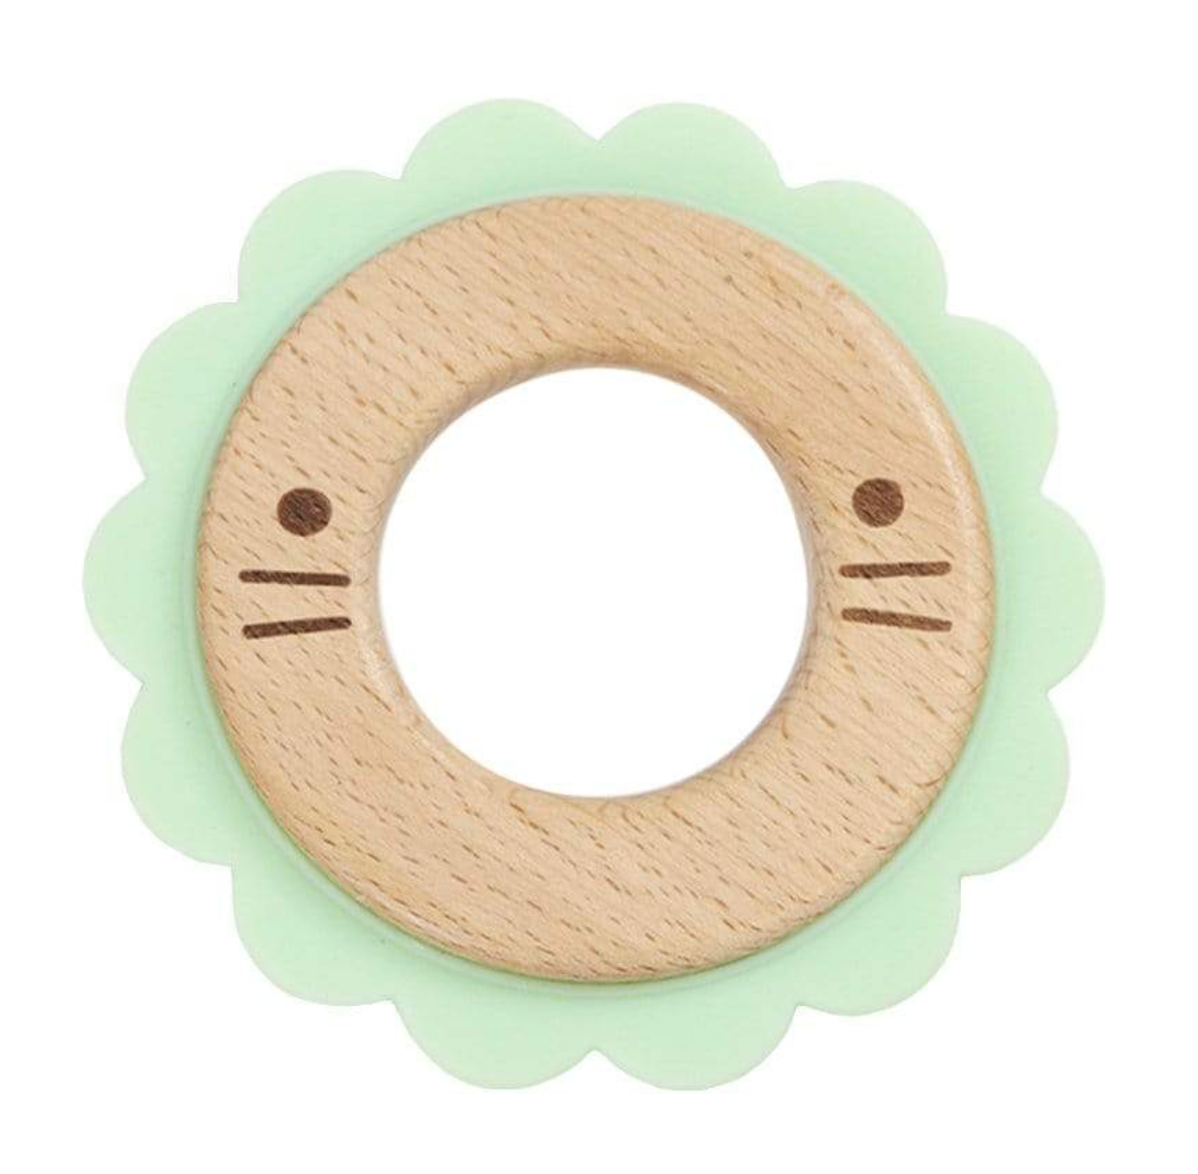 Lion Mint Animal Teether Wooden + Silicone